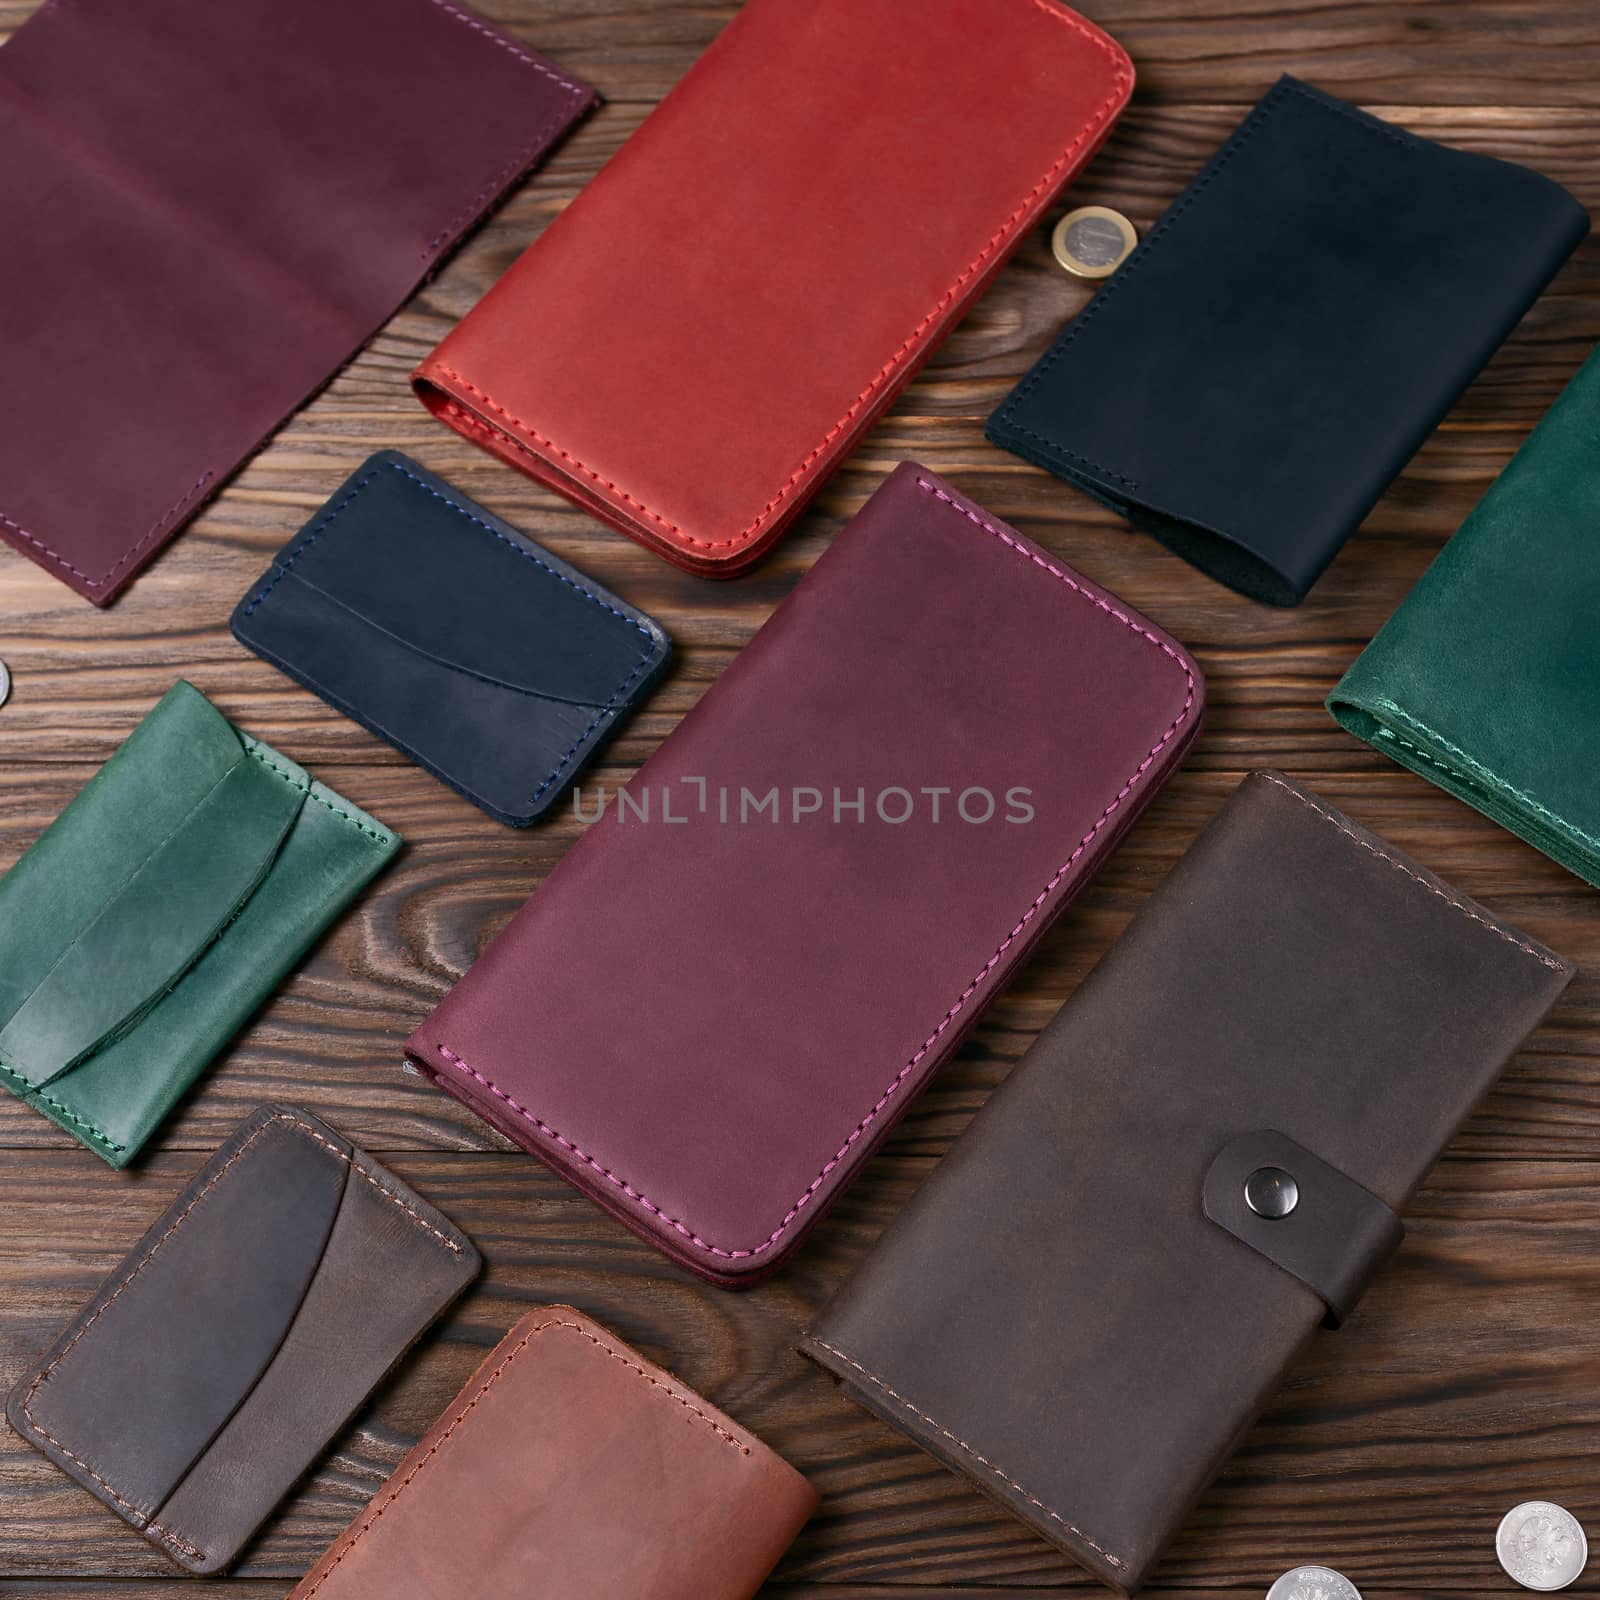 Purple color handmade leather porte-monnaie surrounded by other leather accessories on wooden textured background.  Side view. Stock photo of luxury accessories.